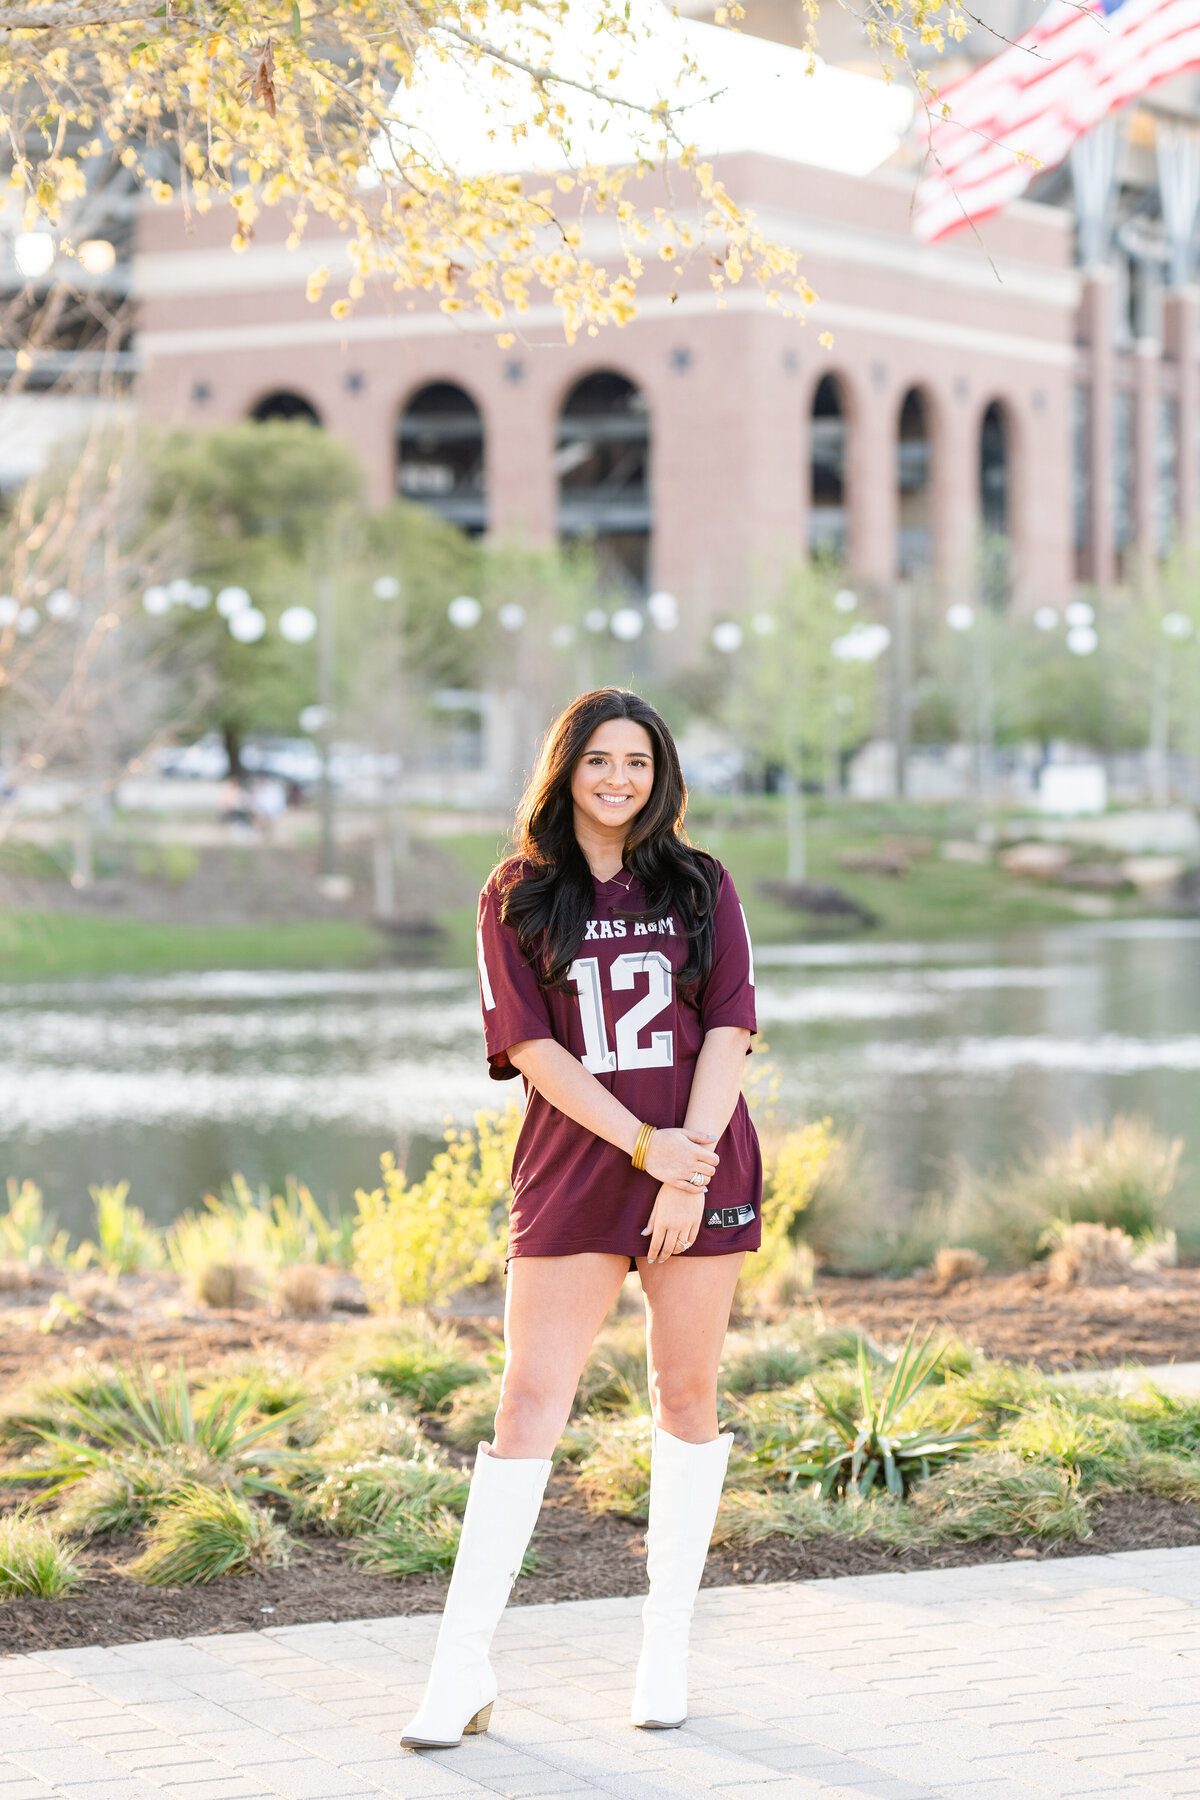 Texas A&M senior girl standing with hand on wrist and smiling in maroon jersey and white boots in Aggie Park in front of Kyle Field